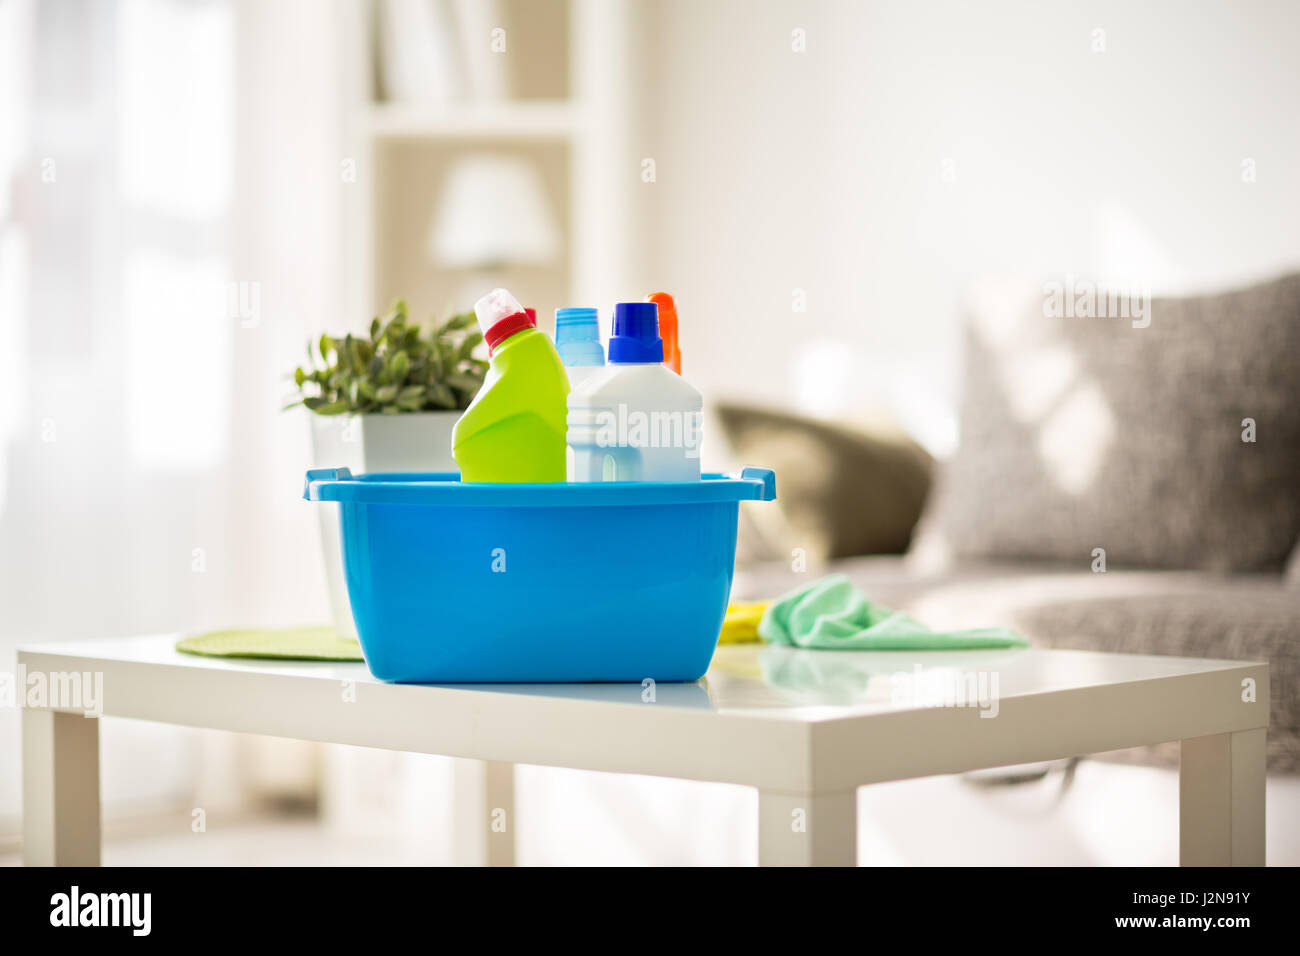 Cleaning products prepared for cleaning Stock Photo